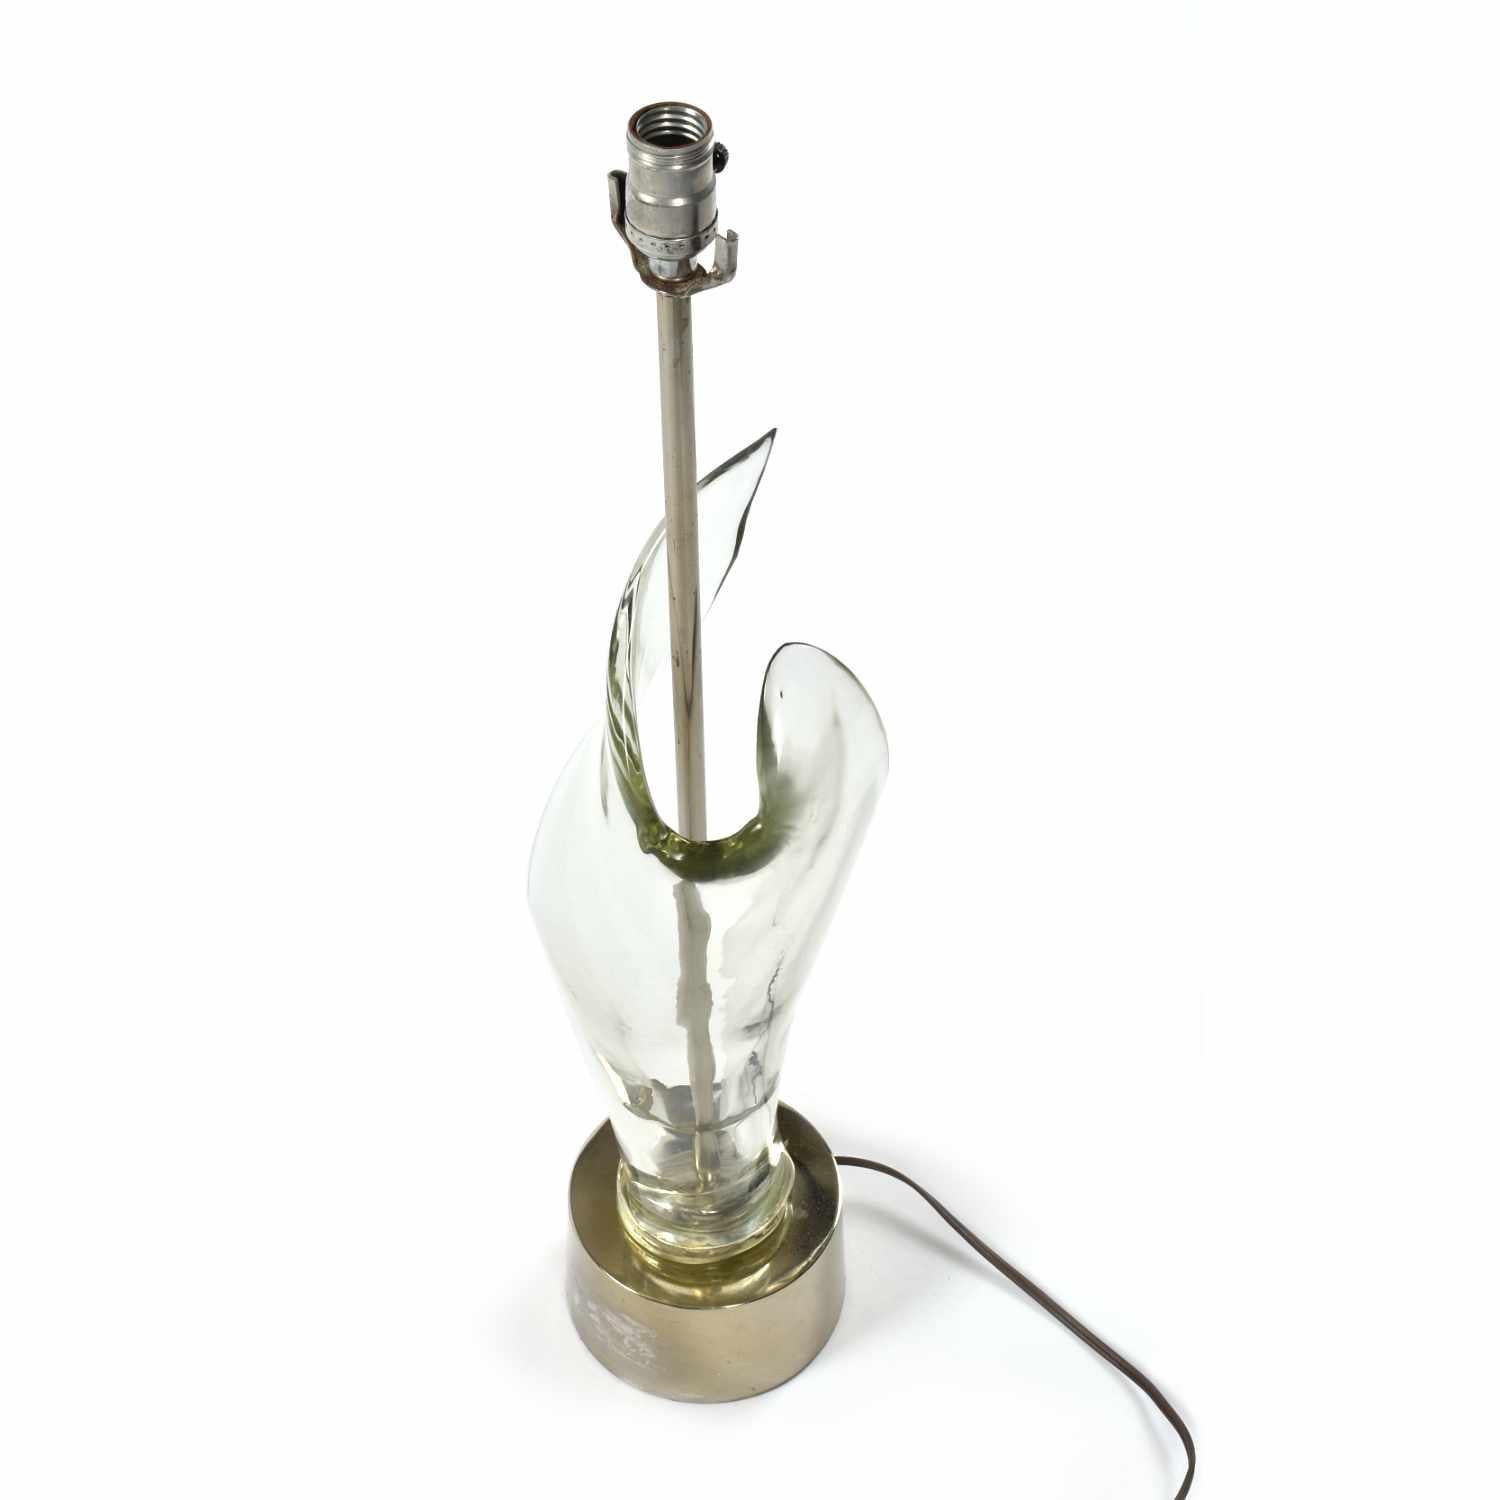 The lamp shade is NOT included with this listing. Please inquire if you would like to purchase the shade separately. 

Elegant Mid-Century Modern sculptural Murano glass table lamp. The piece is unmarked but its of high quality in terms of design